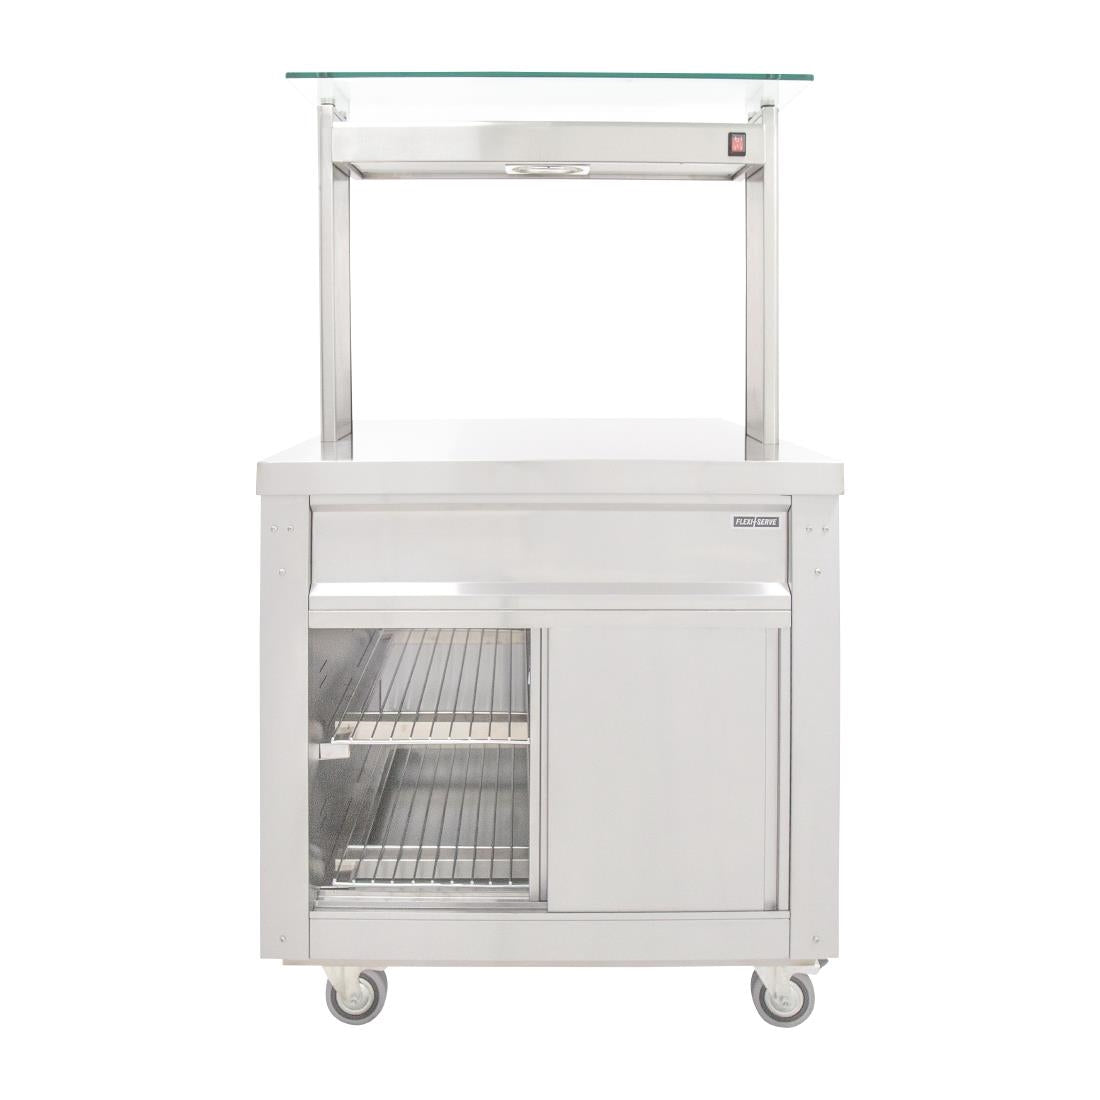 Parry Ambient Buffet Bar with Chilled Cupboard 860mm FS-A2PACK - FD230 Hot Cupboards Parry   